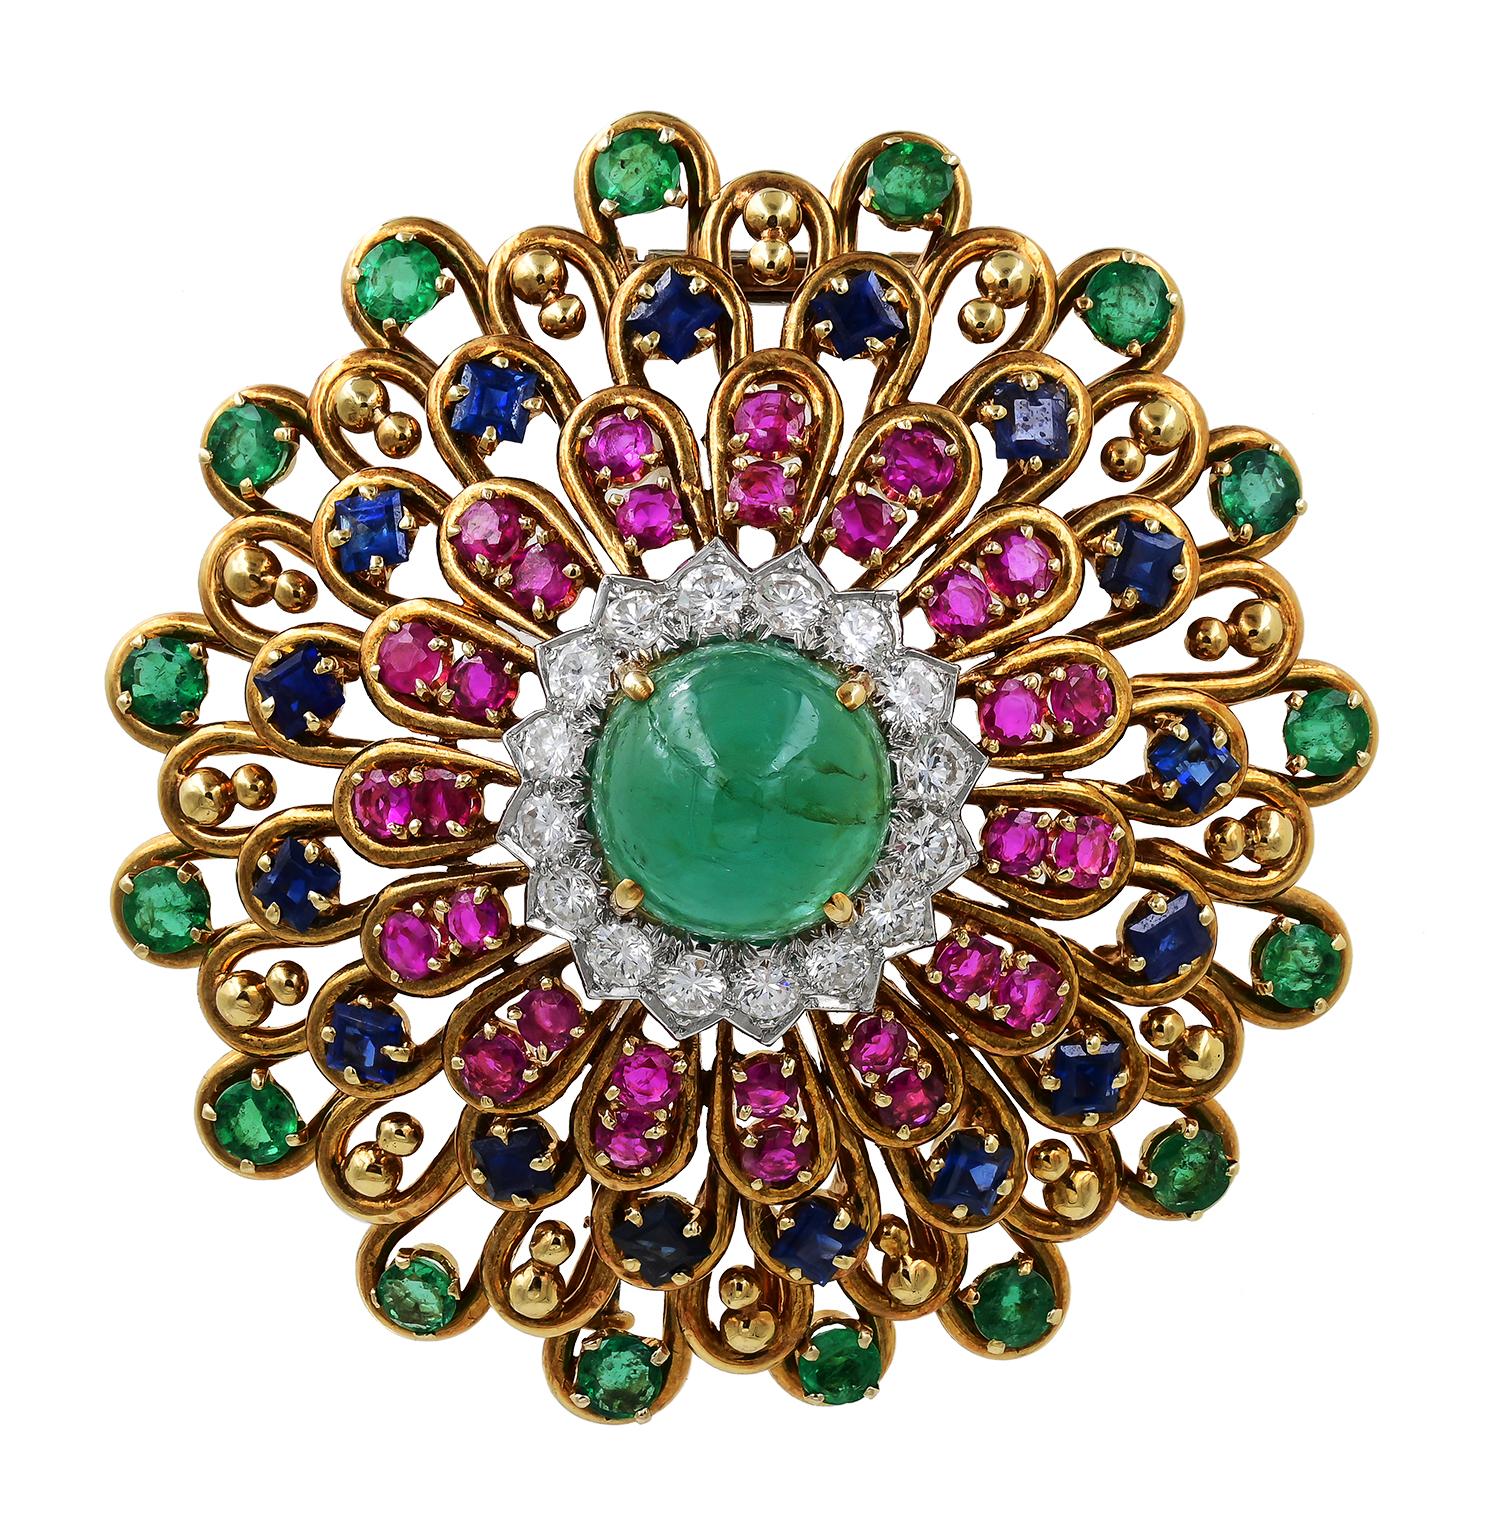 Indulge in elegance with our exquisite David Webb multi-color Diamond brooch. This masterpiece features a captivating Emerald Cabochon center stone, gracefully encircled by 16 dazzling colorless Diamonds, boasting an approximate carat weight of 2